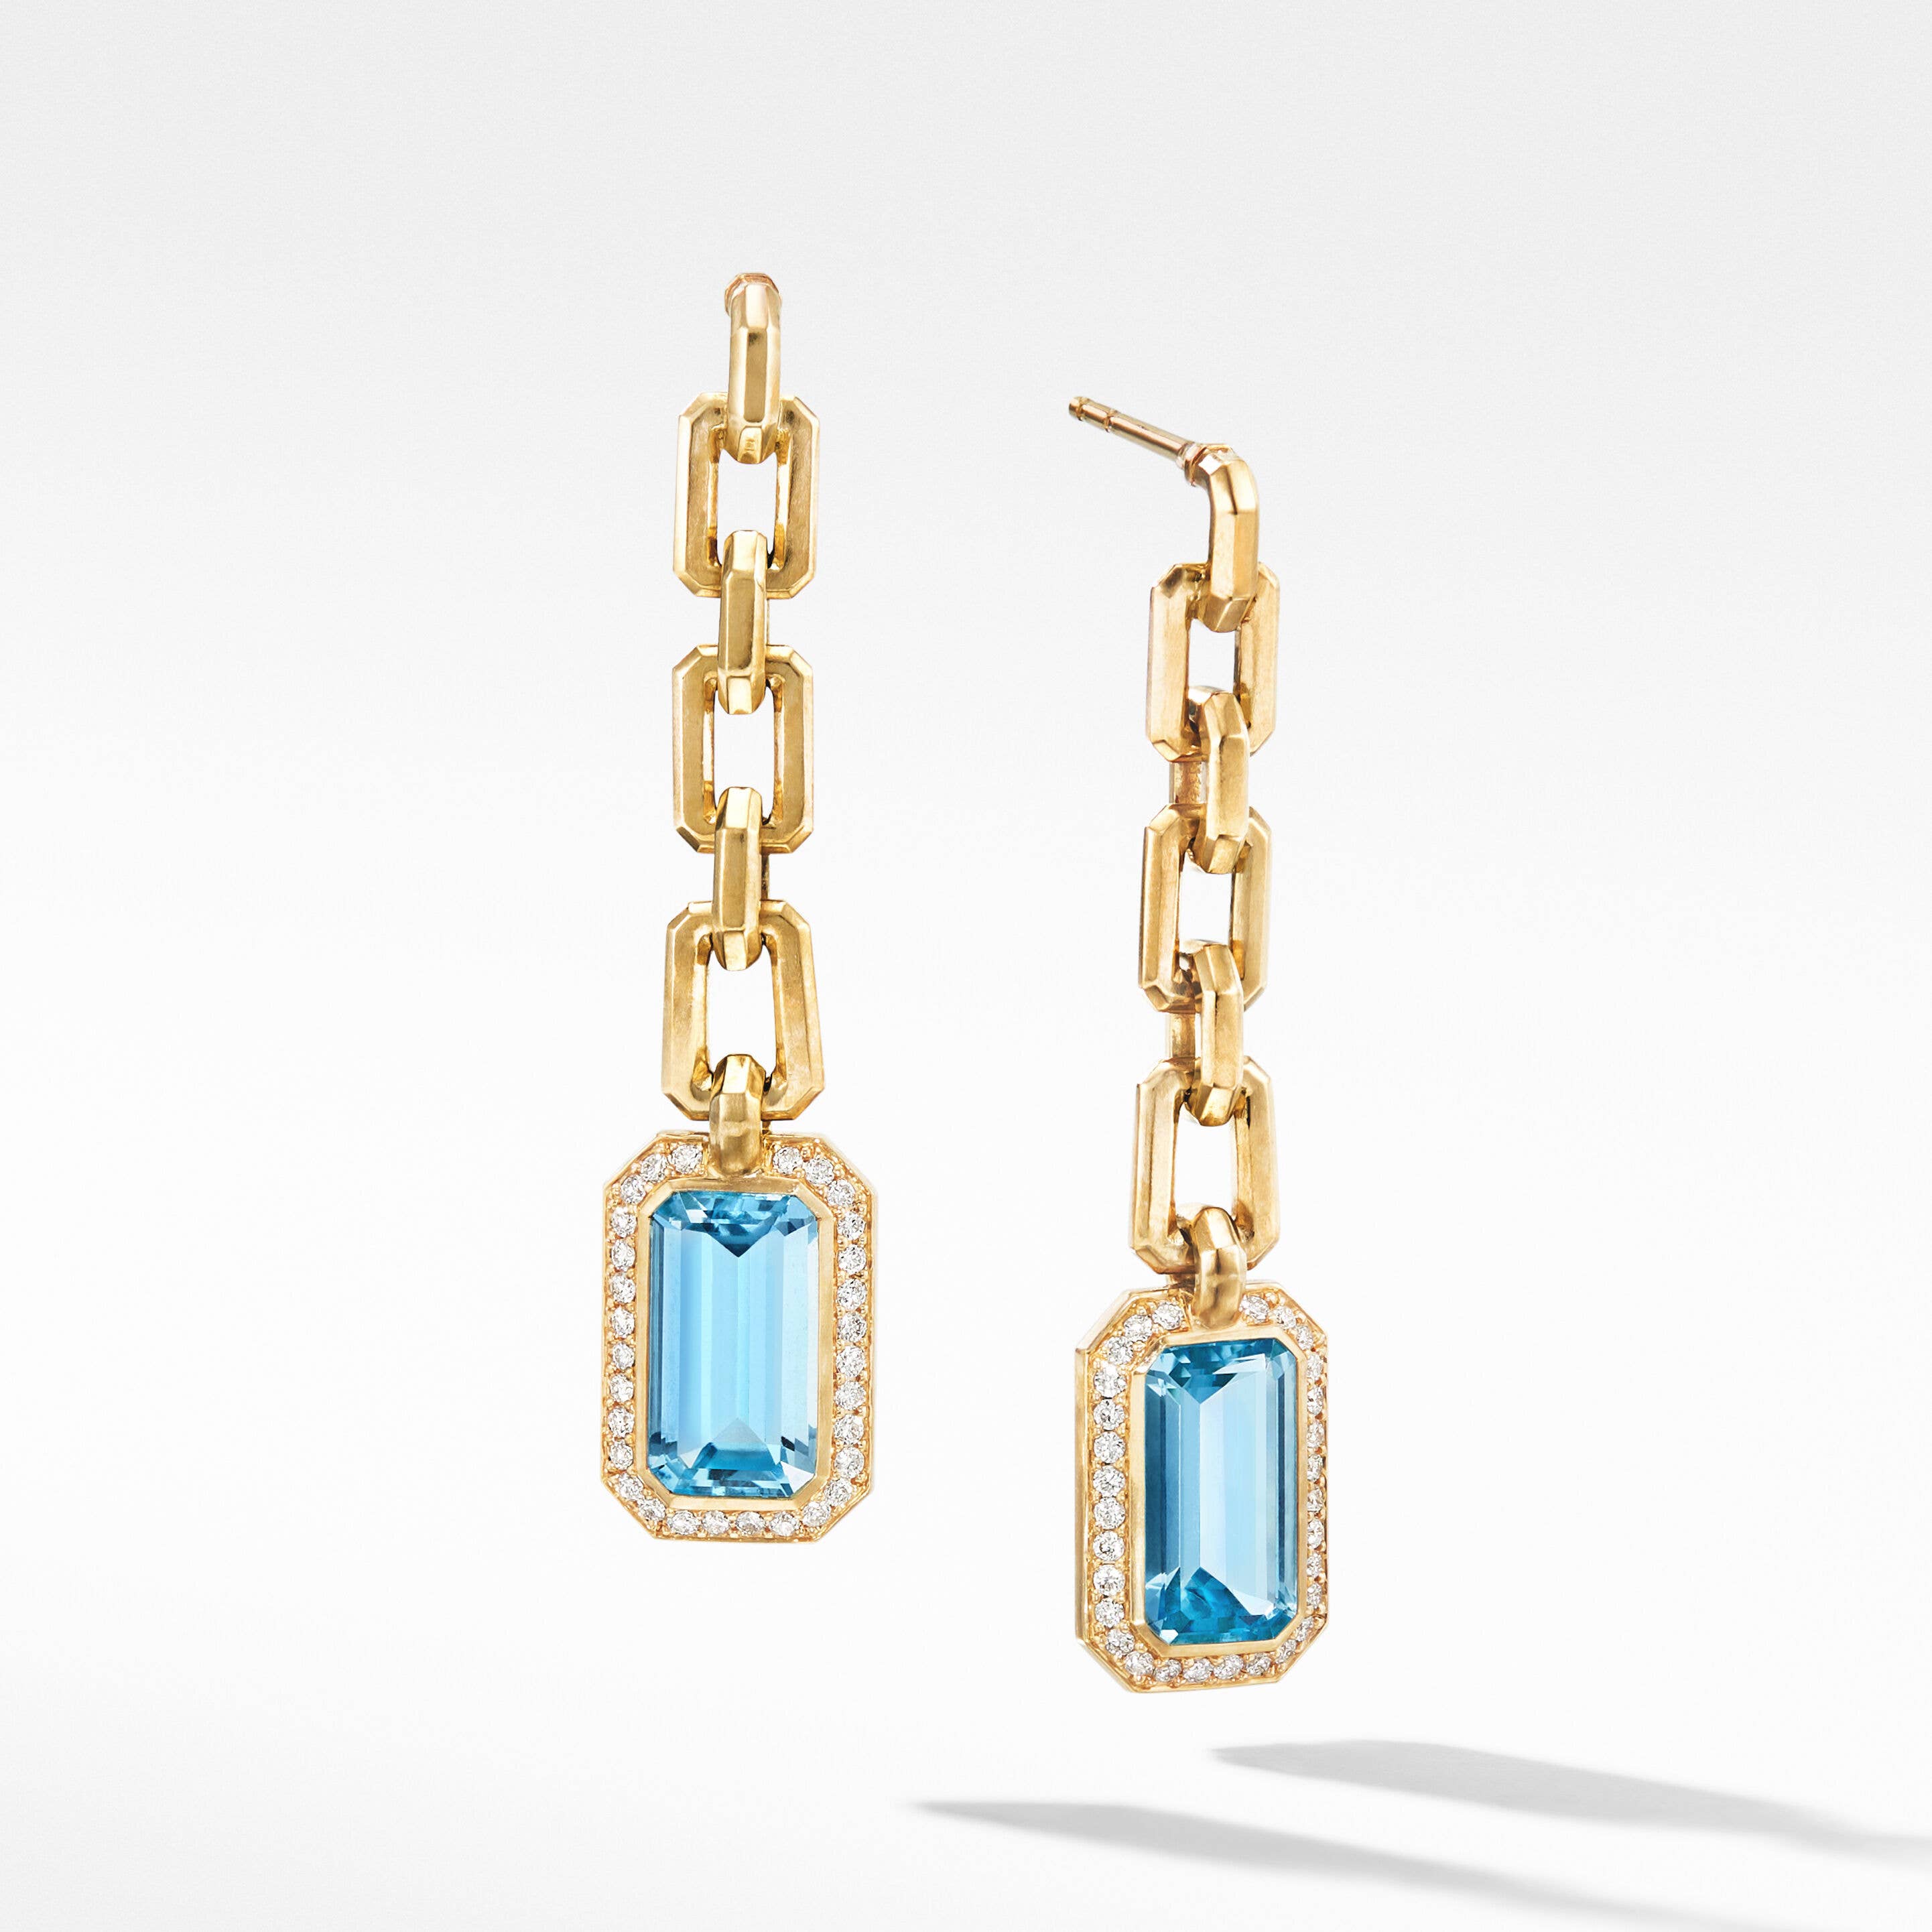 Novella Chain Drop Earrings in 18K Yellow Gold with Blue Topaz and Pavé Diamonds